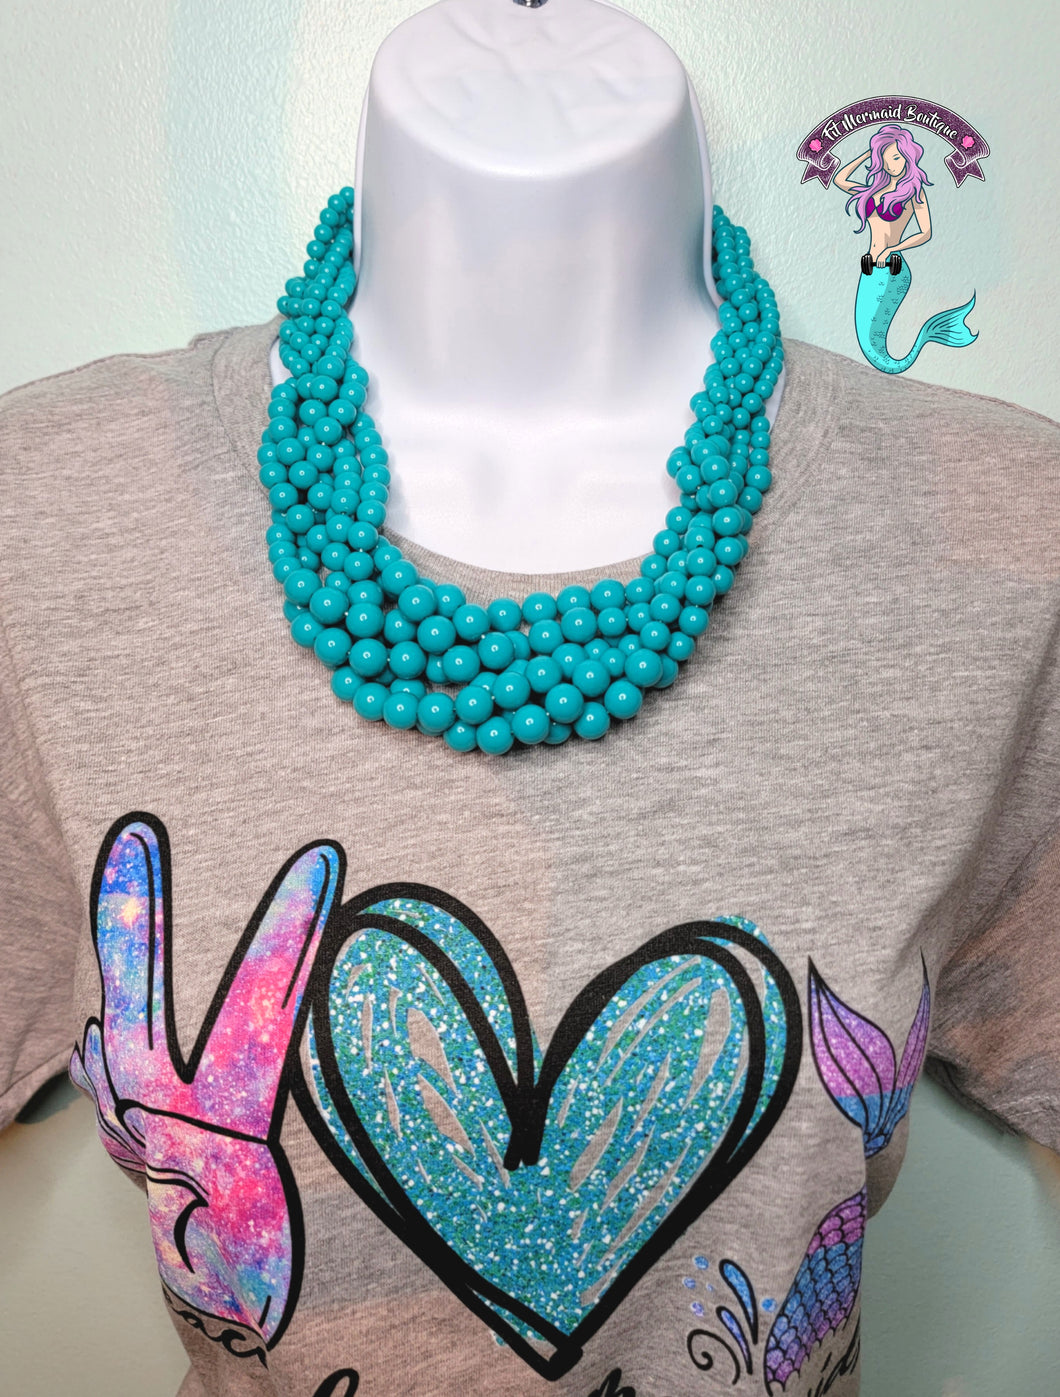 Beads necklace